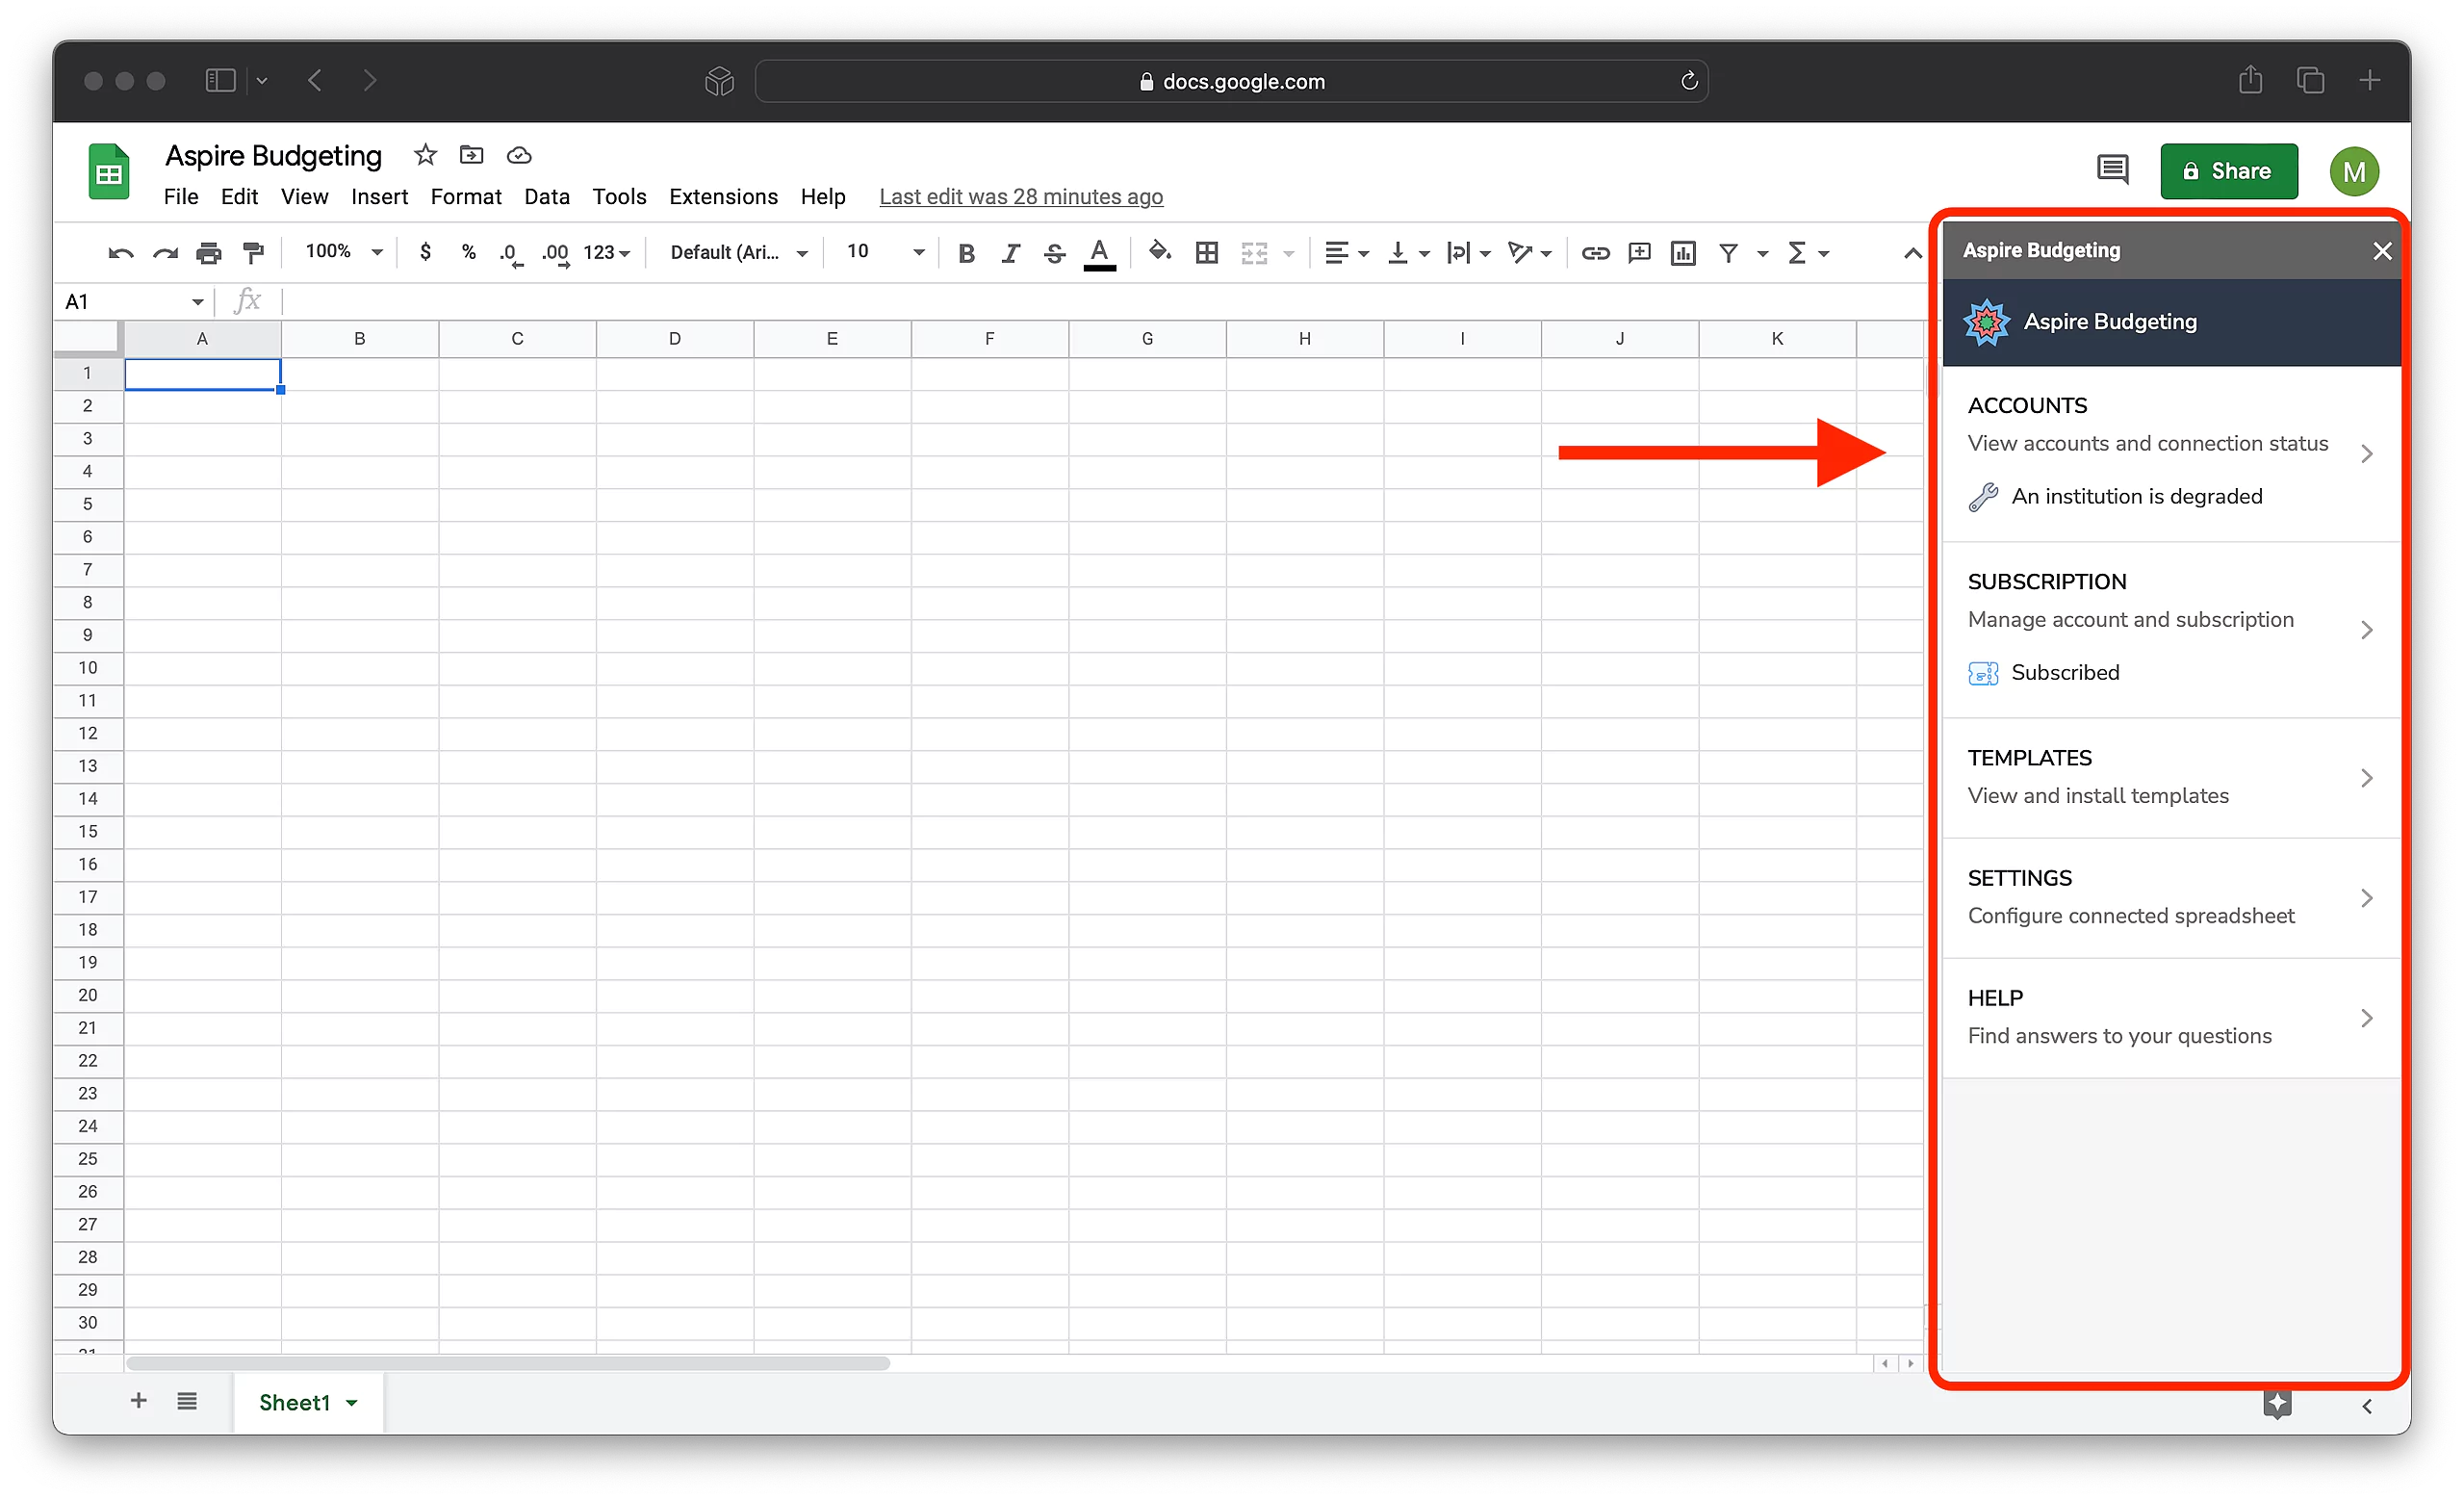 Add-on running in Google Sheets